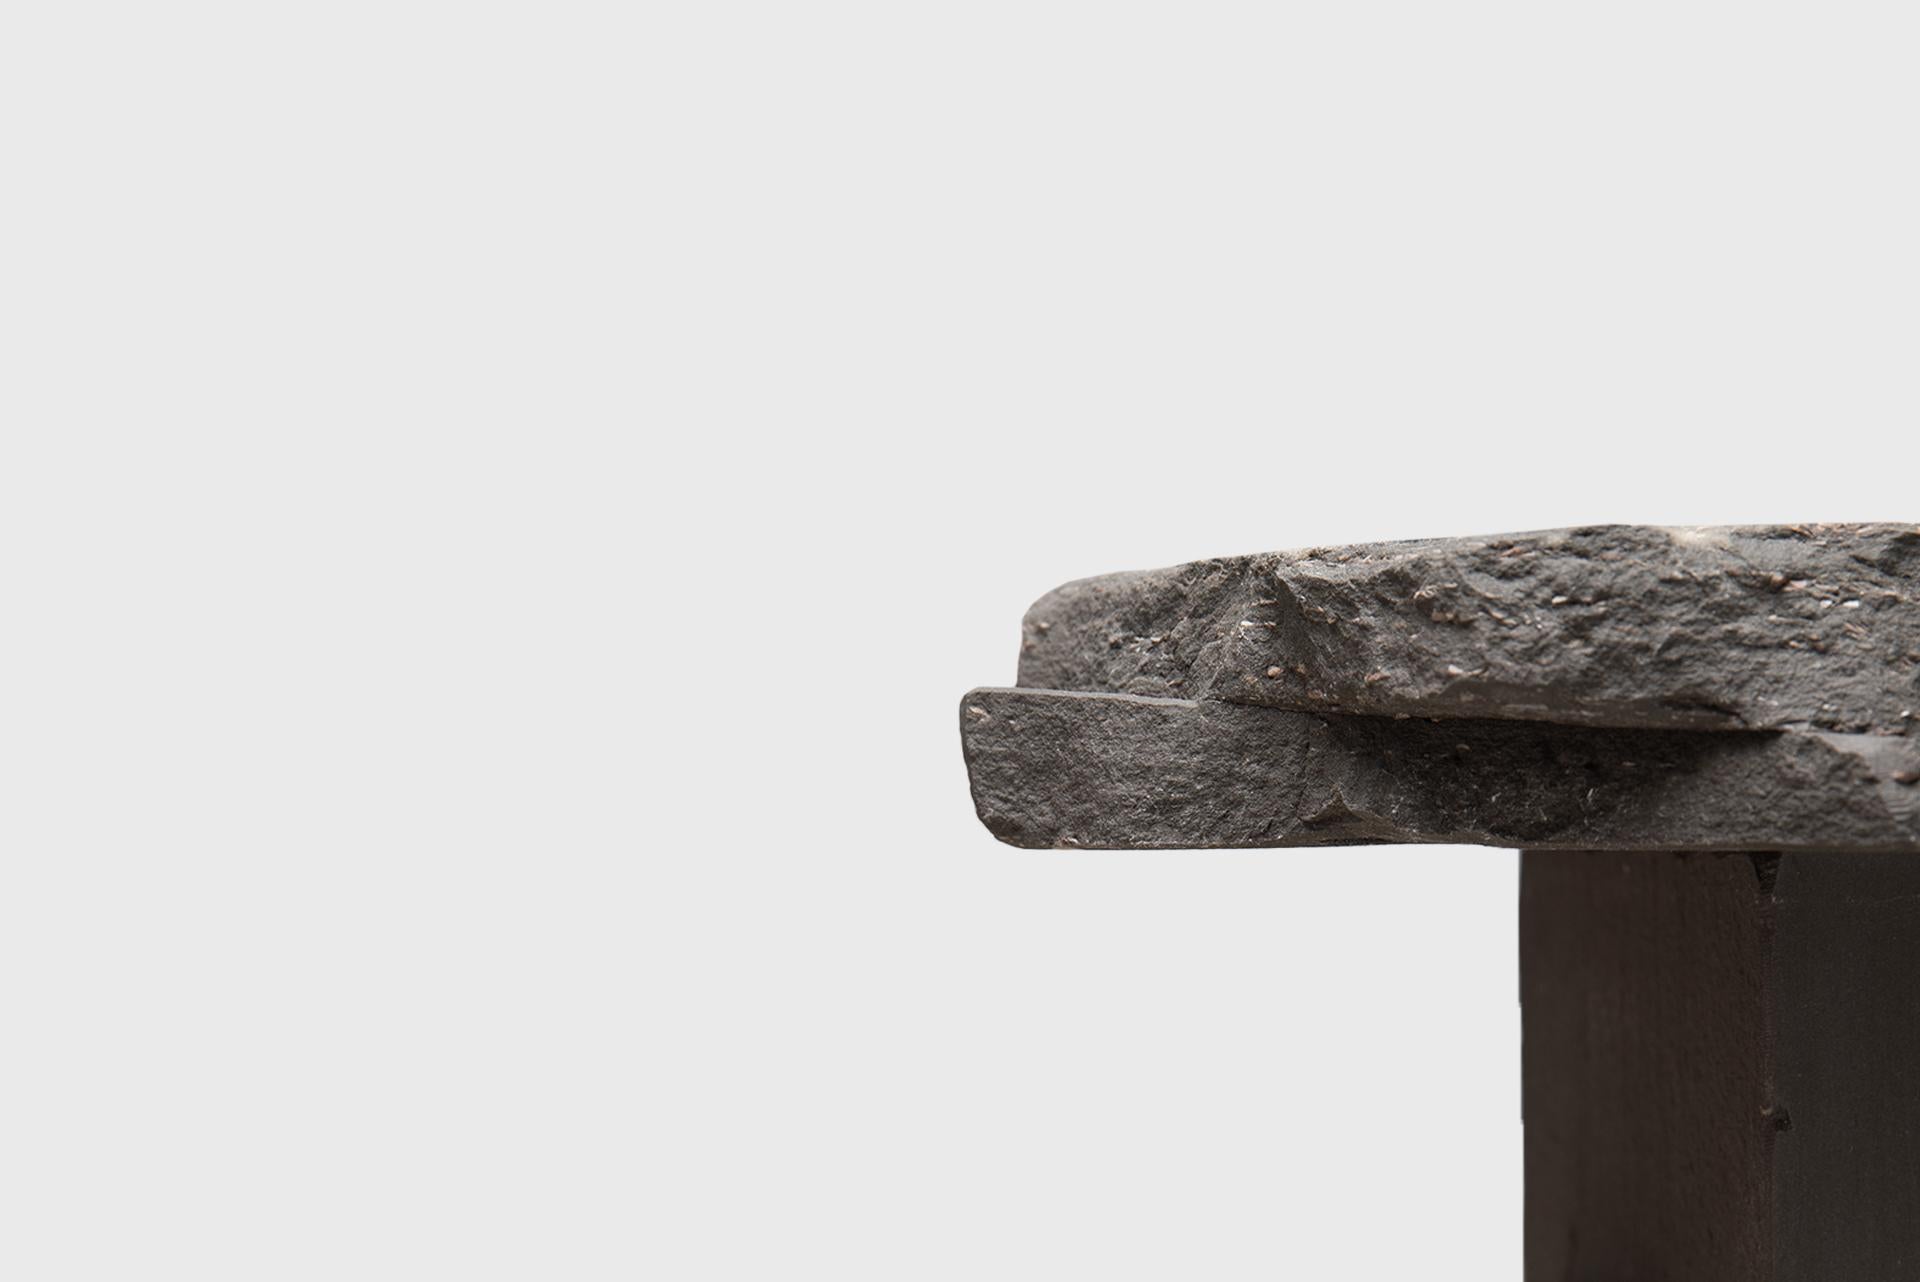 From Graywacke Offcut Series.
Manufactured by Carsten in der Elst .
Exclusively for SIDE.
Germany, 2023.
Greywacke stone, felt.

Measurements
34 x 35 x 47,5h cm
13,4 x 13,8 x 18,7h in

Provenance
Cologne, Germany.

Exhibitions
Sourcing